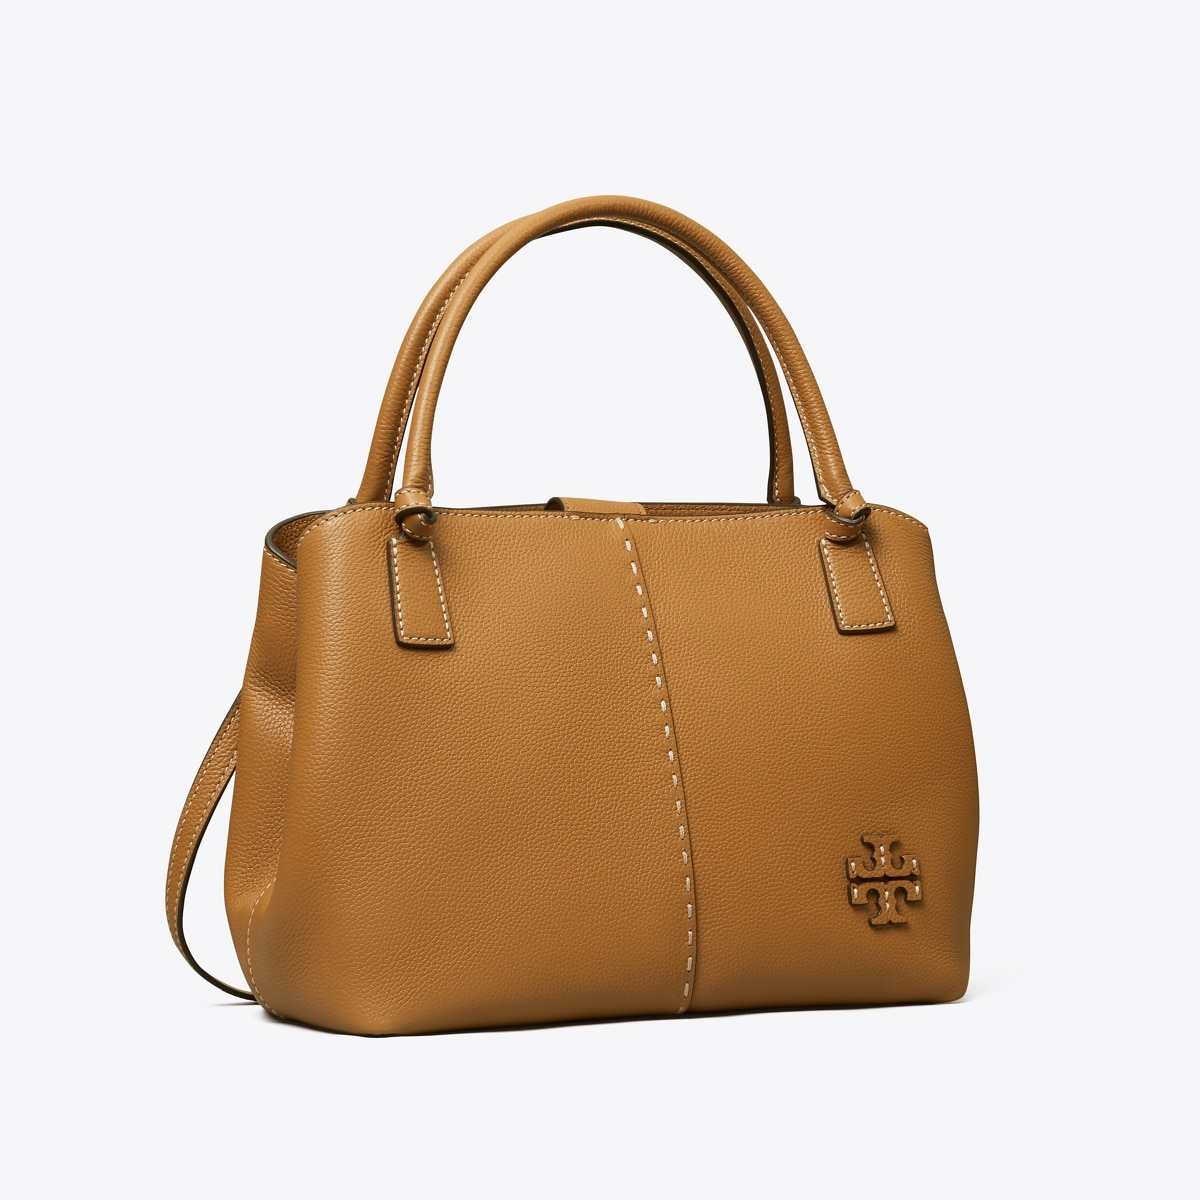 Tory Burch Purse Outlet Malls In Nj | Literacy Ontario Central South